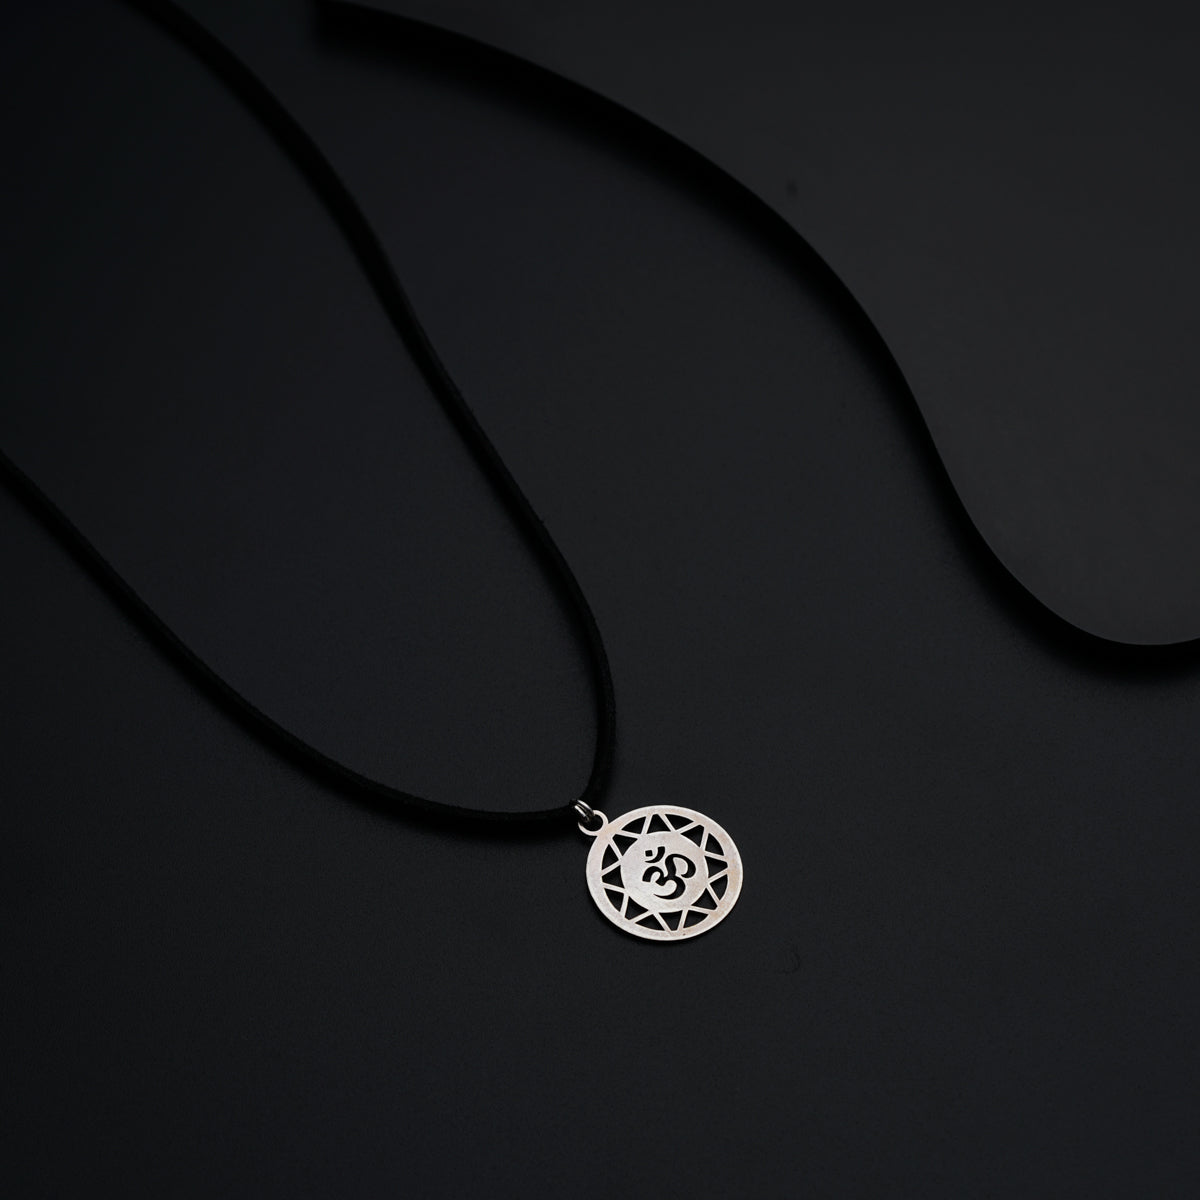 a necklace with a silver pendant on a black background